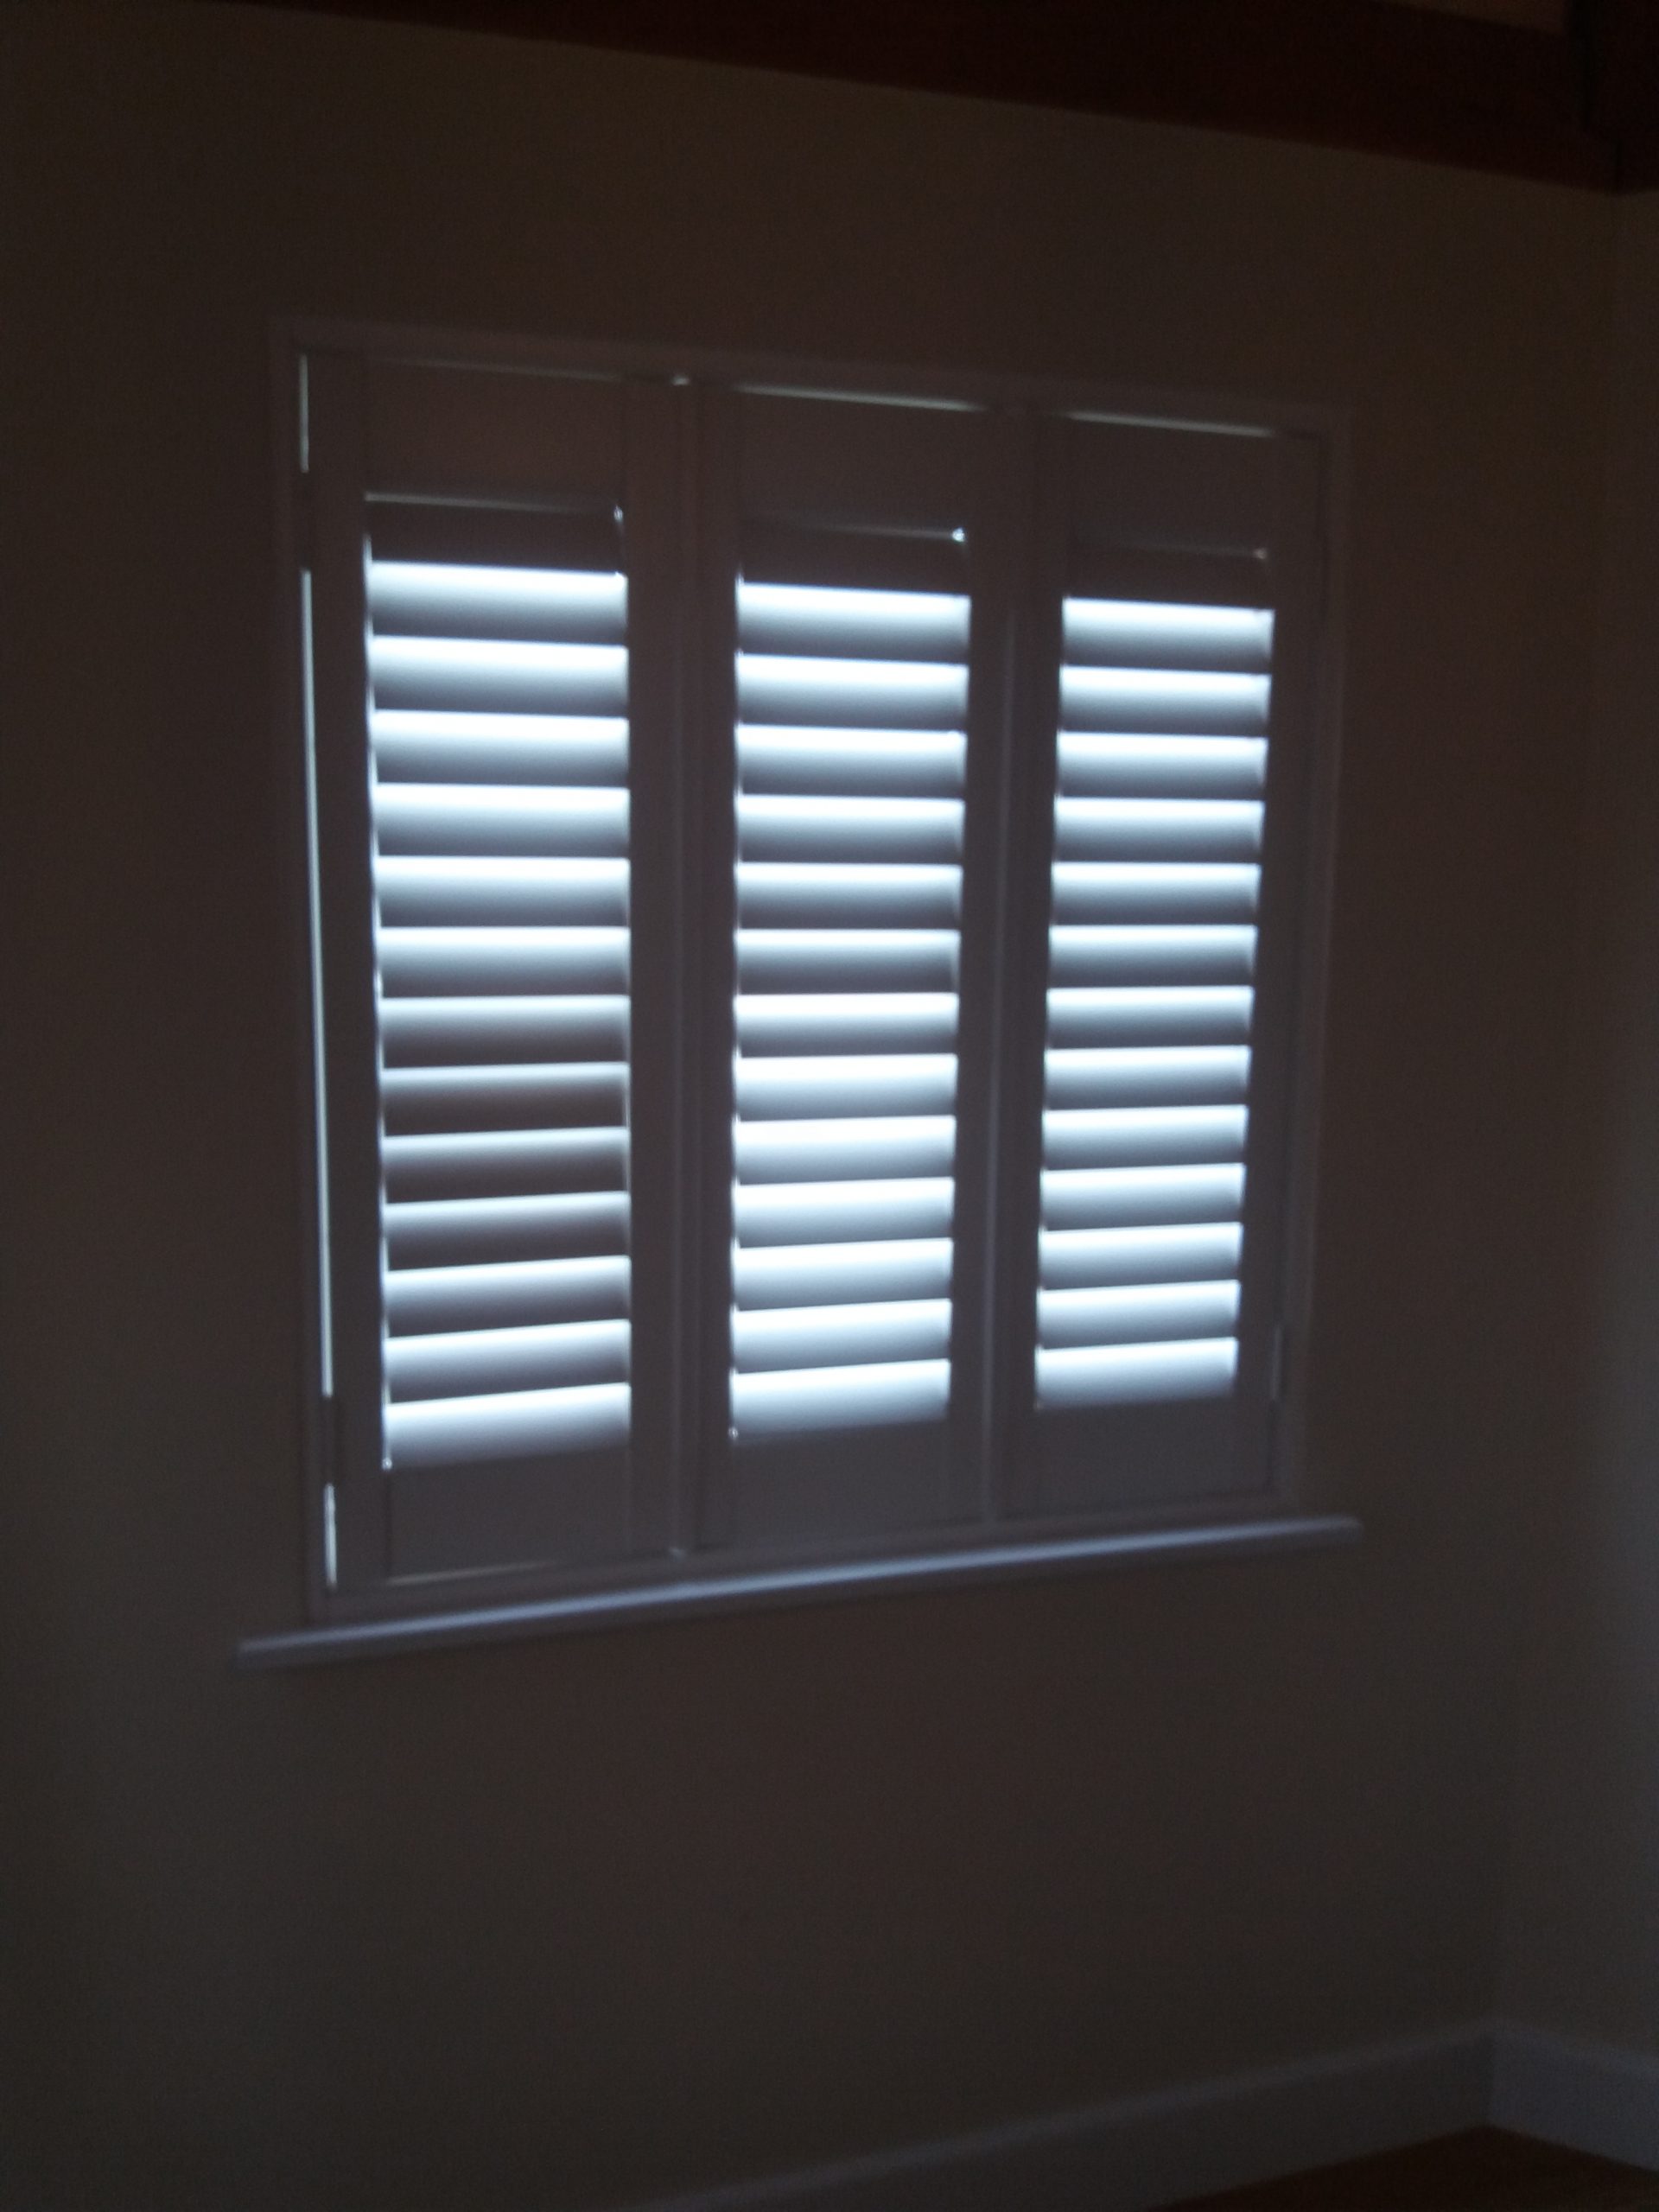 Full Height Fauxwood shutters From Taylor Wilson Shutters In Morecambe